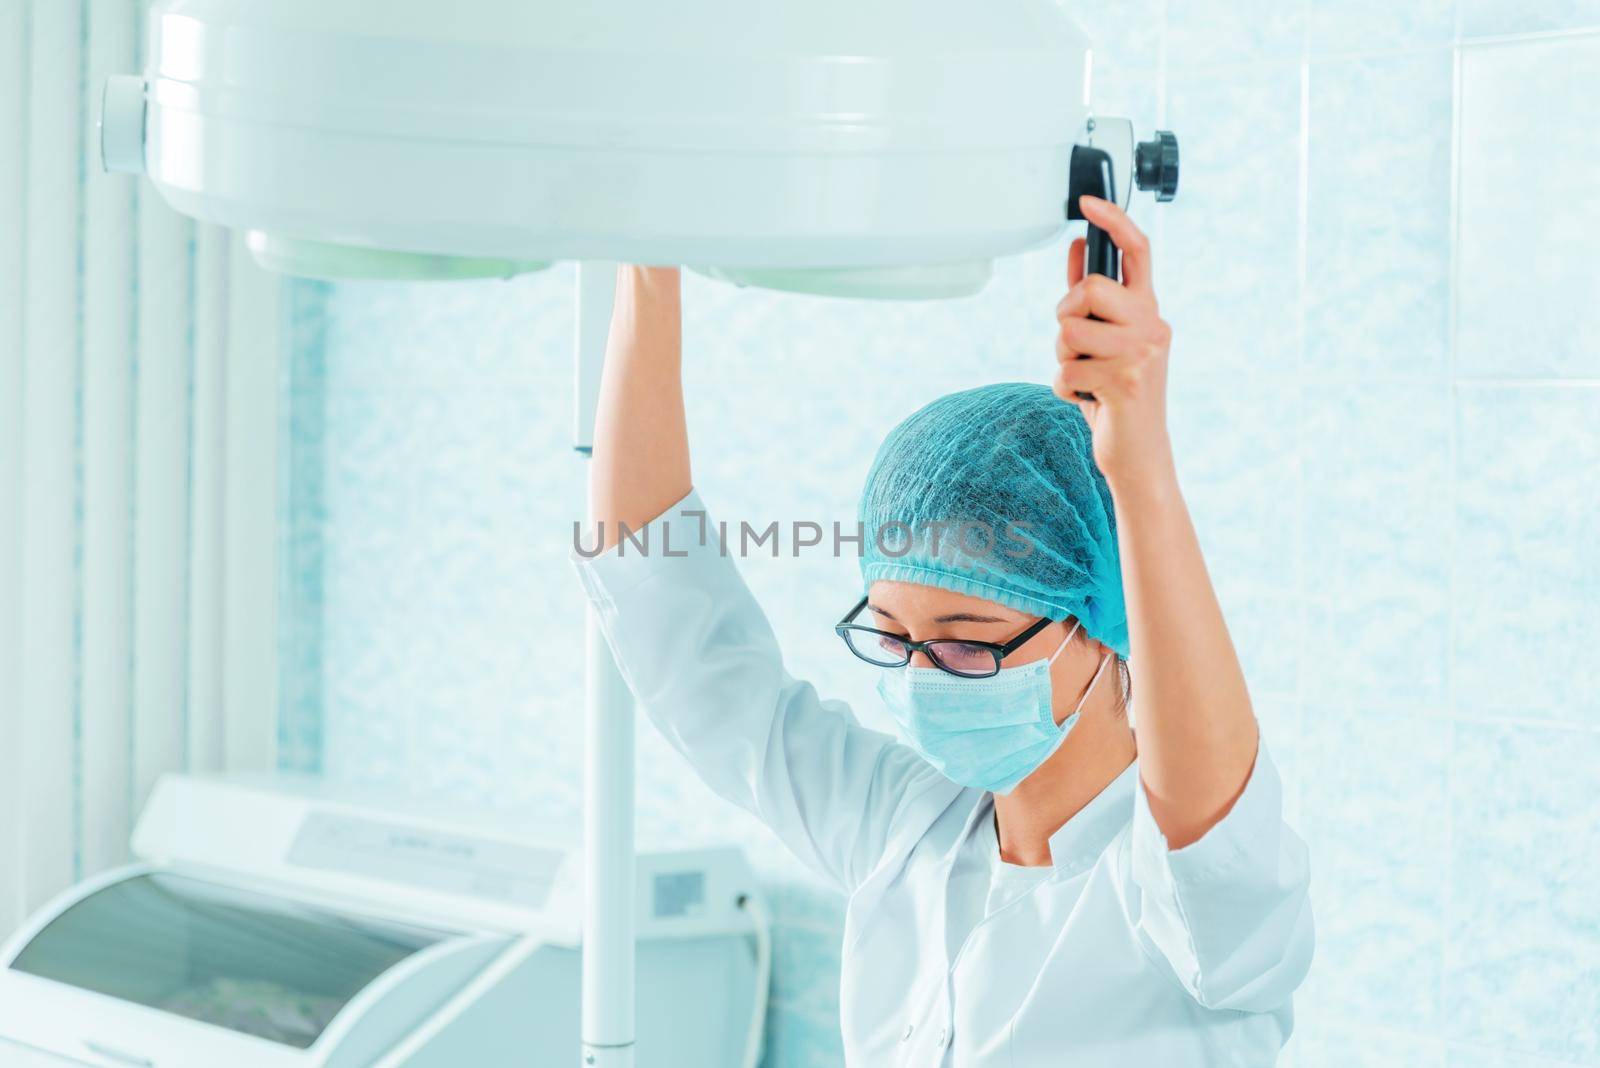 Medical assistant in a mask and cap places a surgical lamp for operation